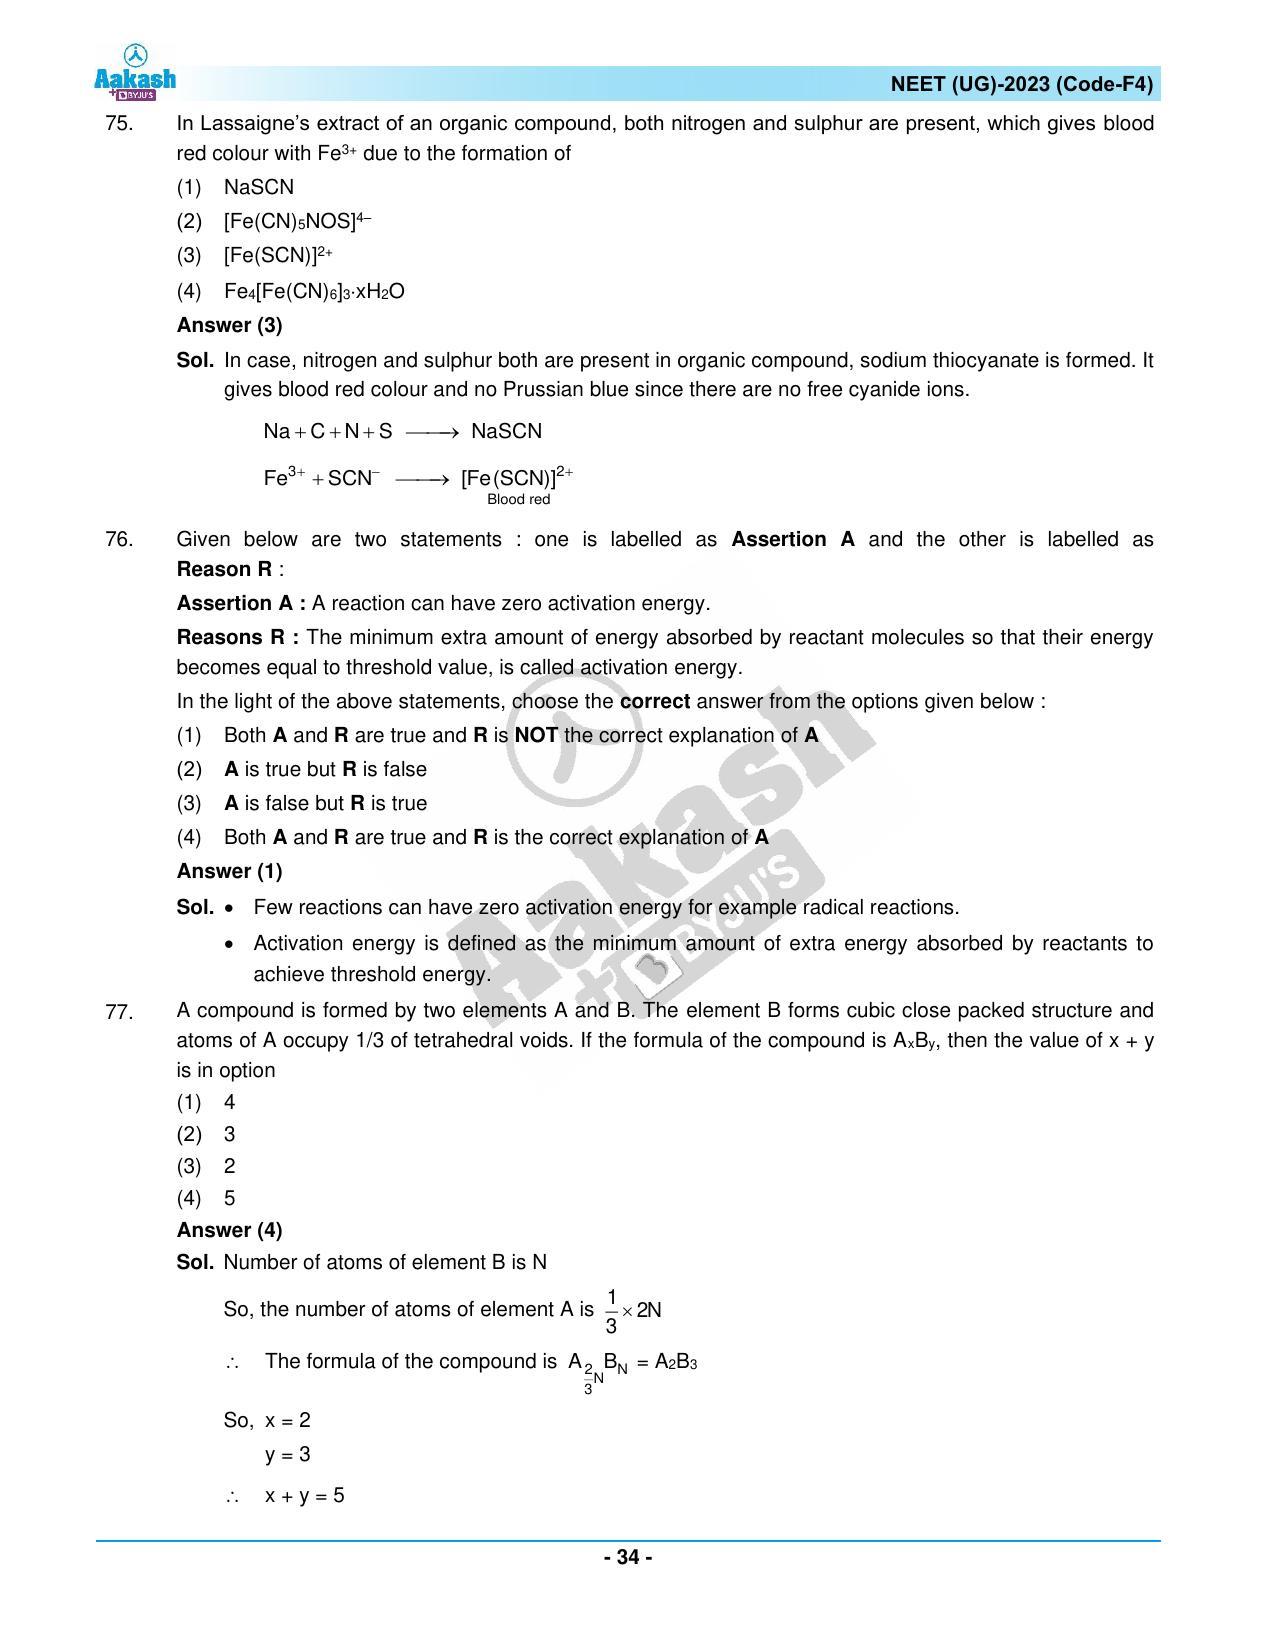 NEET 2023 Question Paper F4 - Page 34